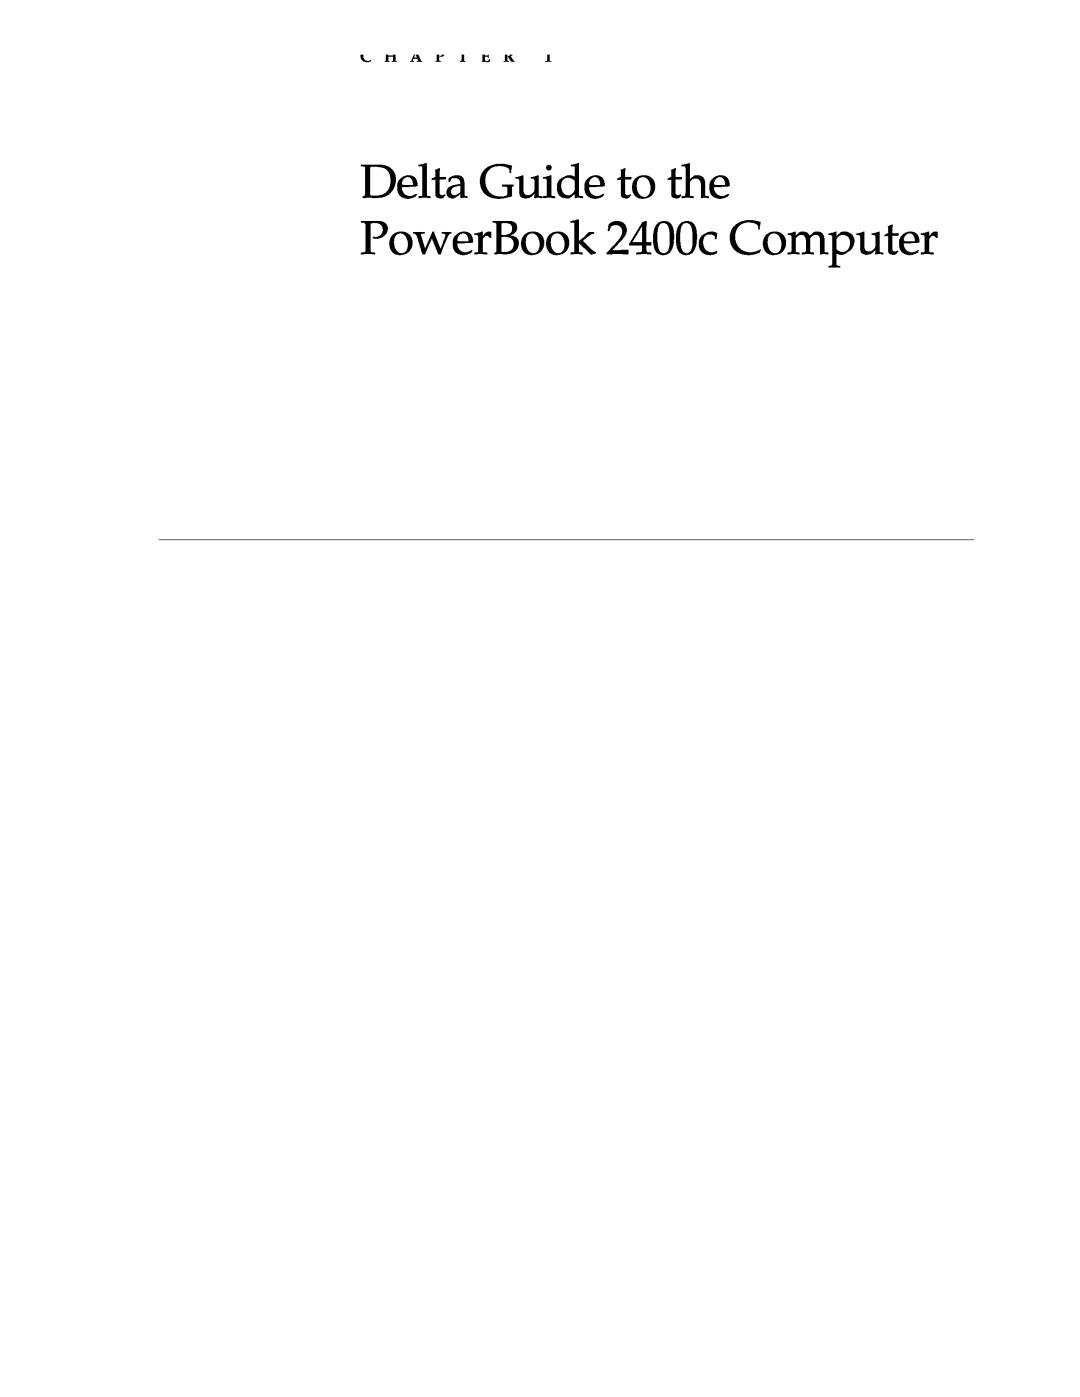 Apple 2400C manual Delta Guide to the PowerBook 2400c Computer, C H A P T E R, Listing 